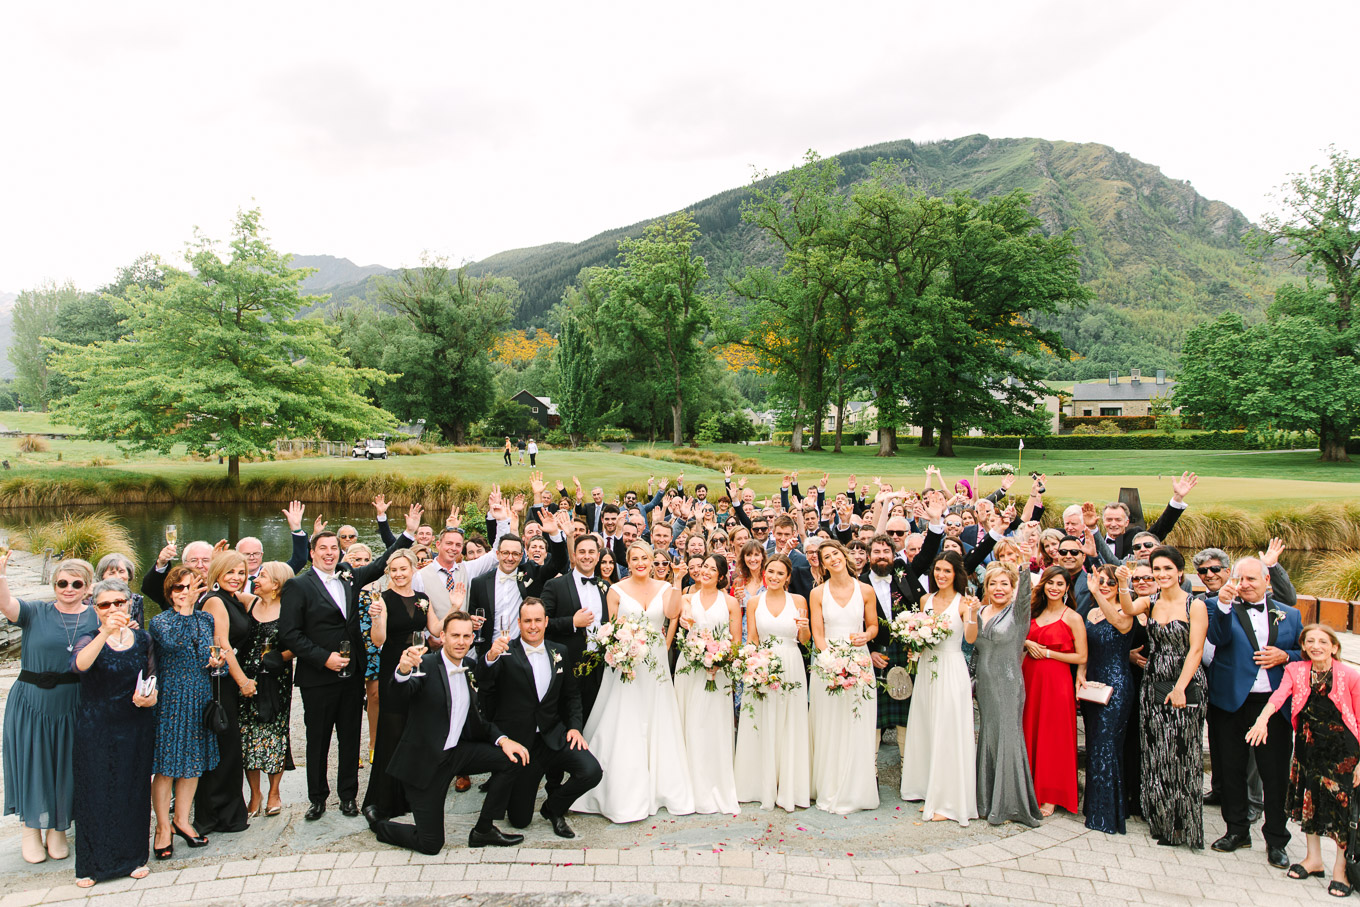 All guests in attendance. Millbrook Resort Queenstown New Zealand wedding by Mary Costa Photography | www.marycostaweddings.com